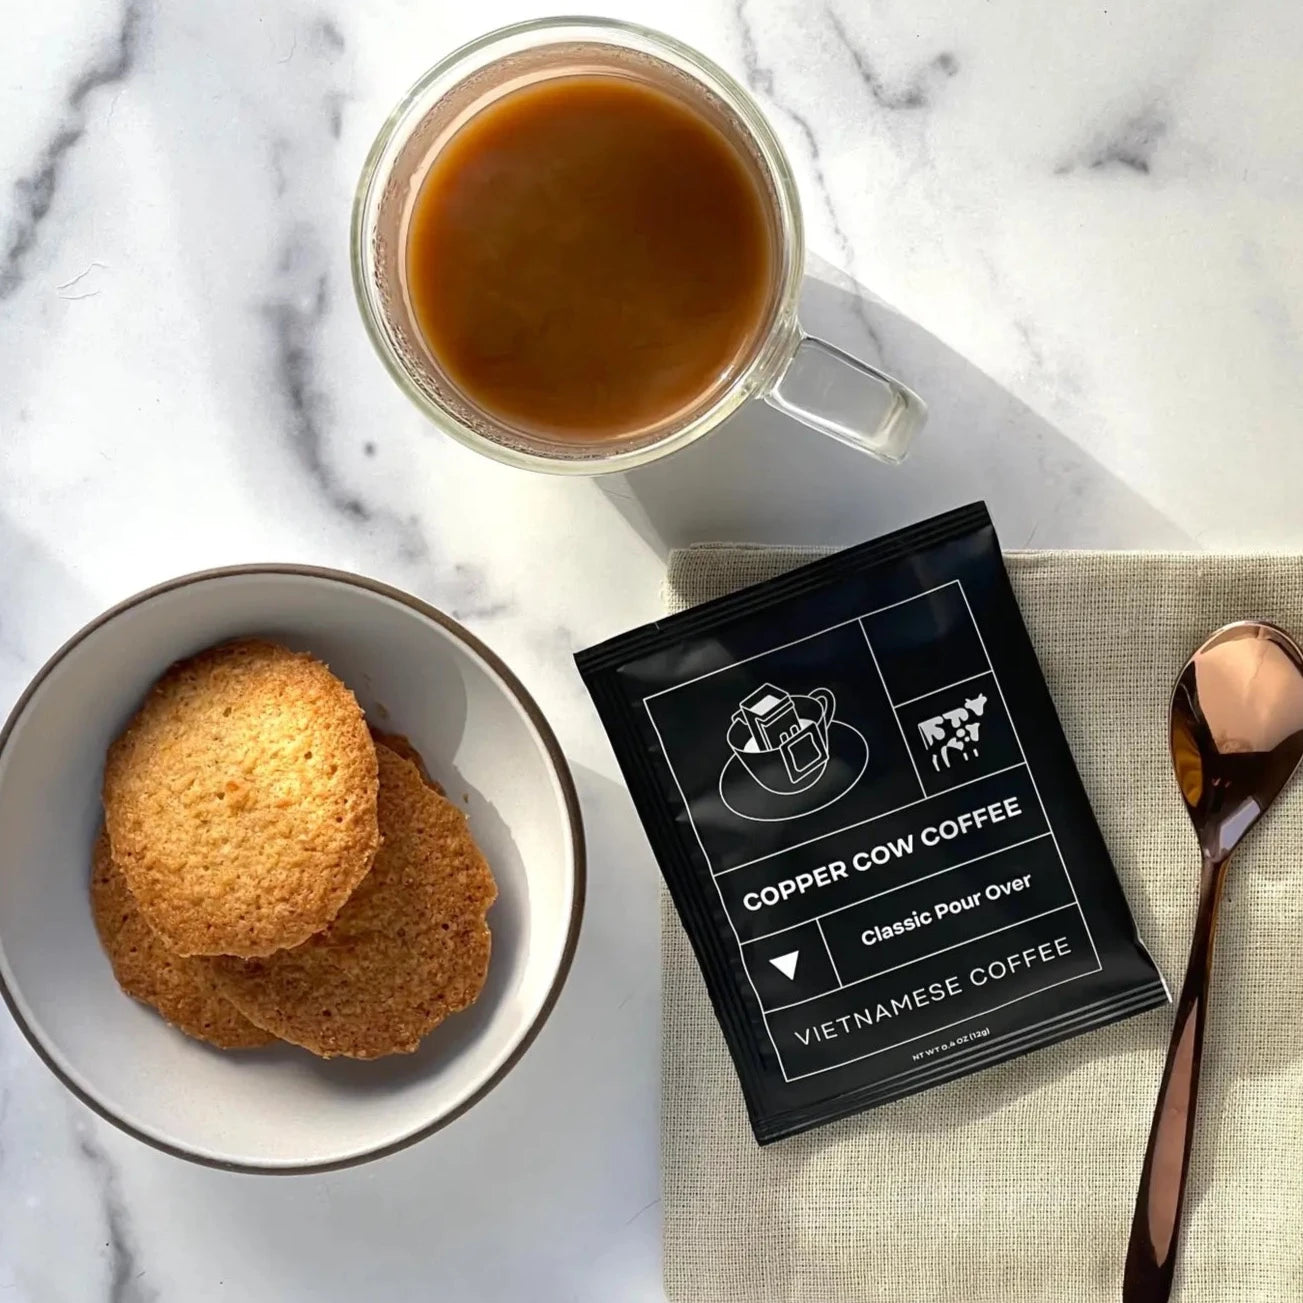 Black packaging for single serving coffee next to a spoon, plate of cookies and mug of coffee.